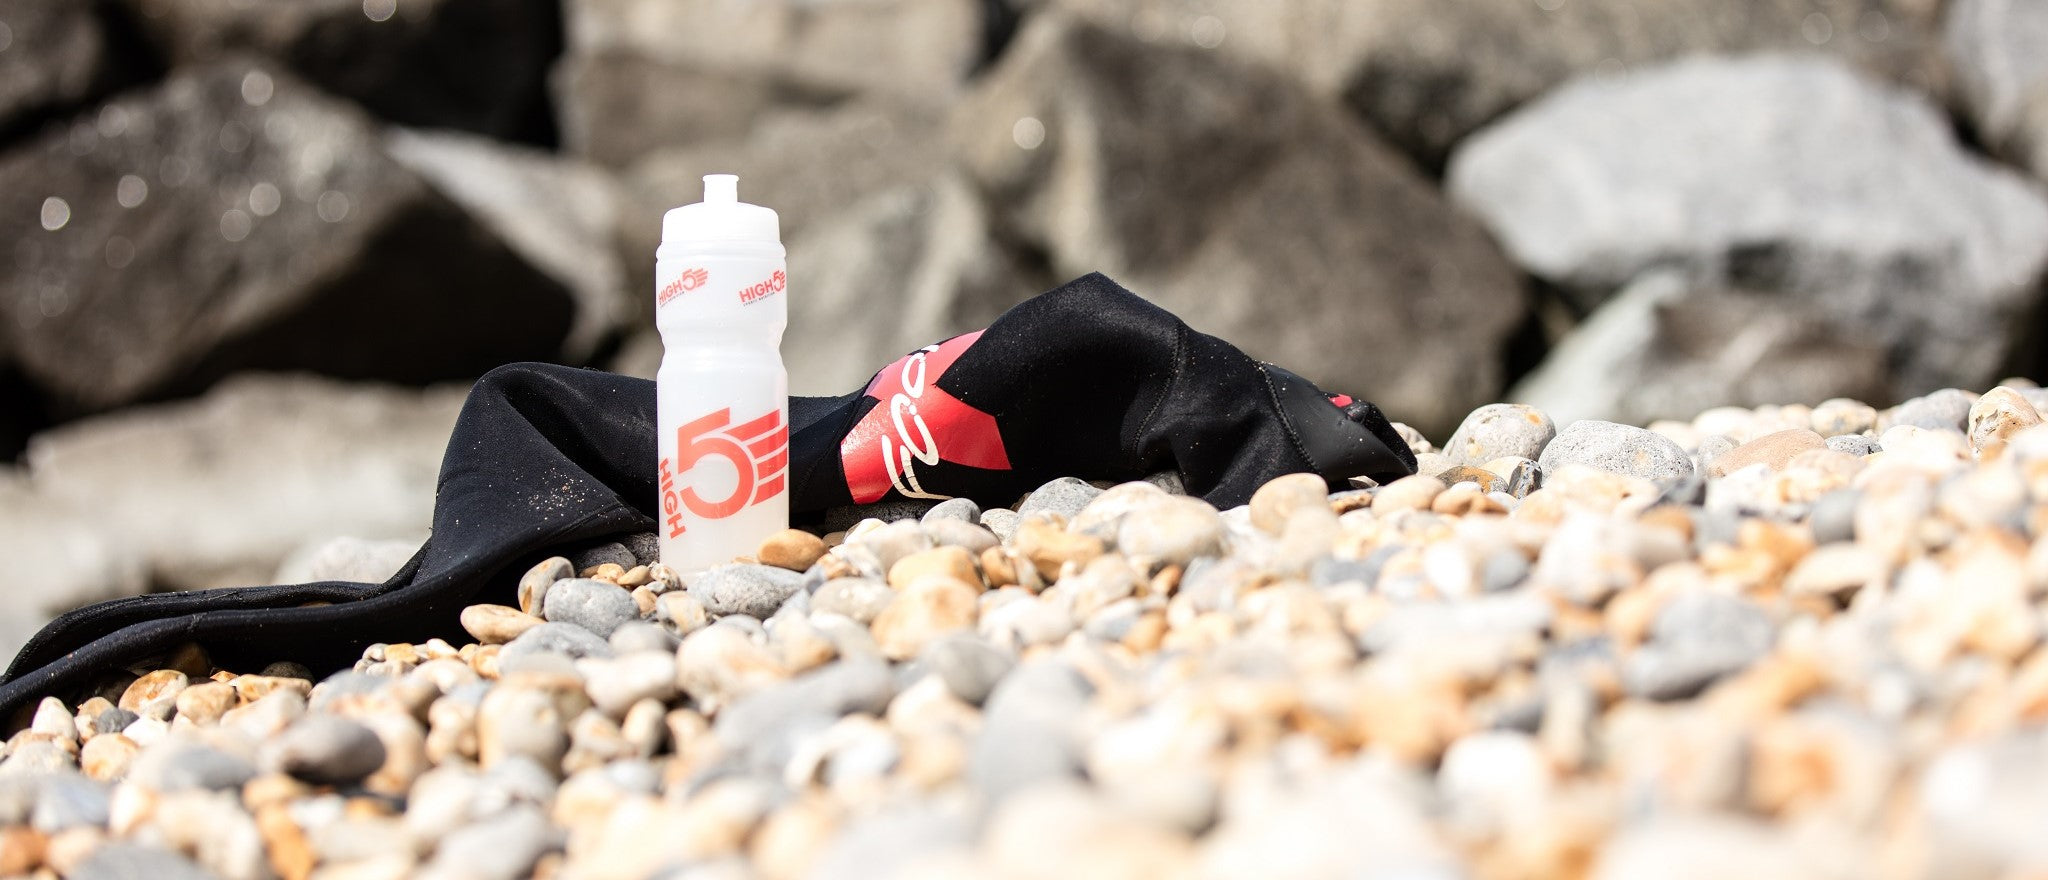 Water bottle and wetsuit on a beach